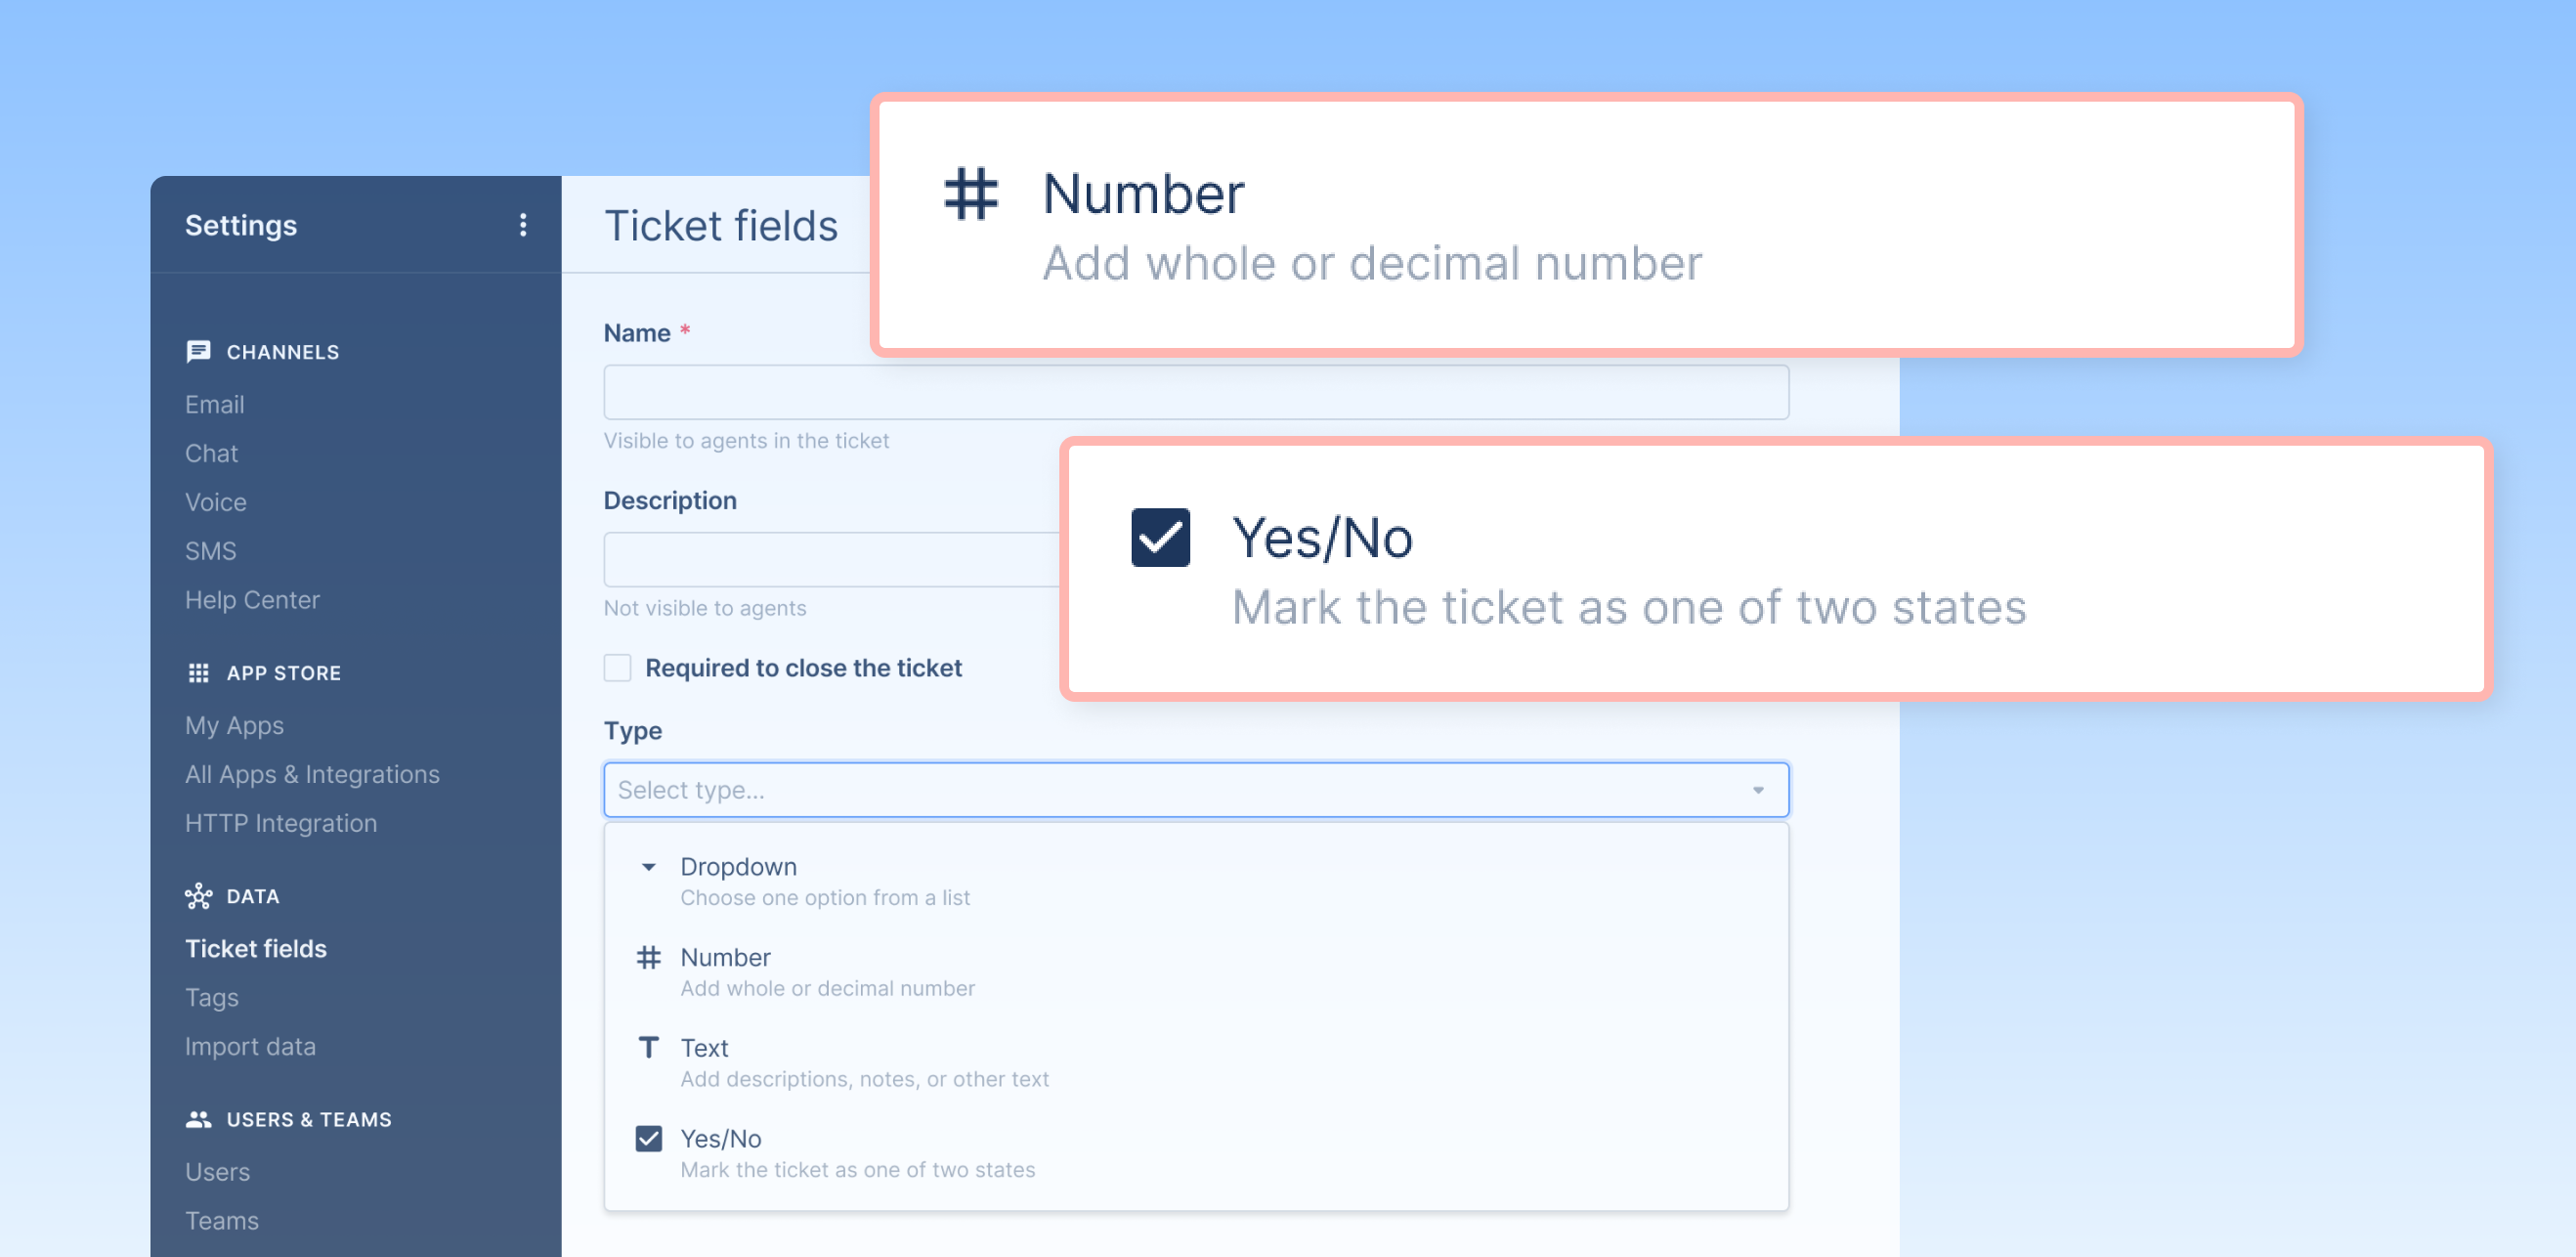 New ticket fields types: Number and Yes/No